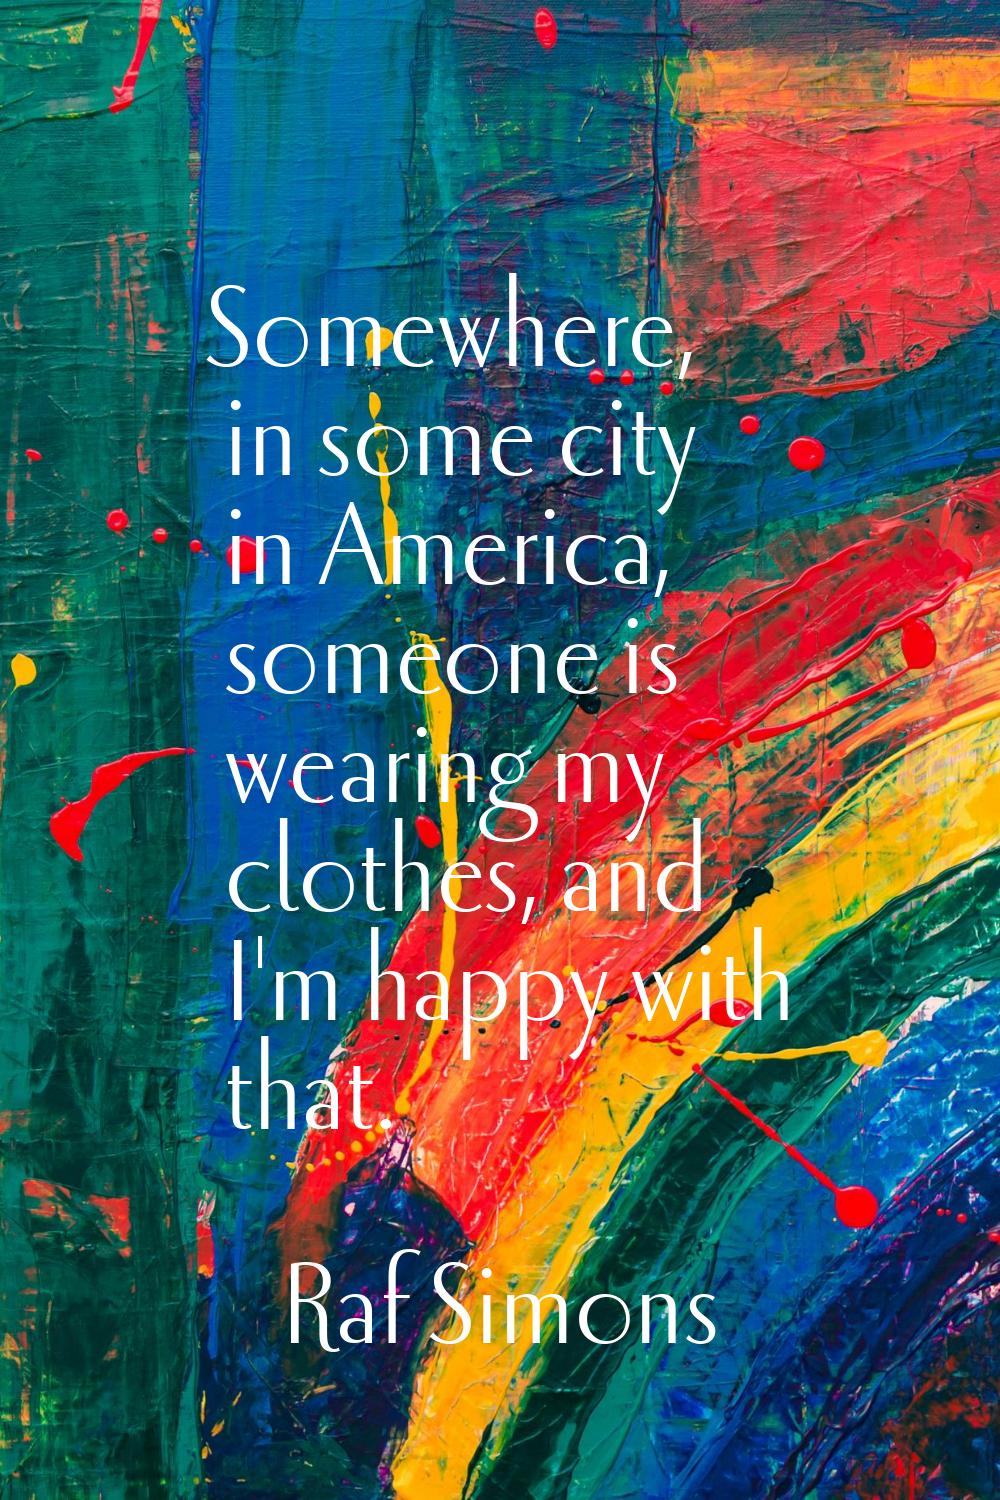 Somewhere, in some city in America, someone is wearing my clothes, and I'm happy with that.